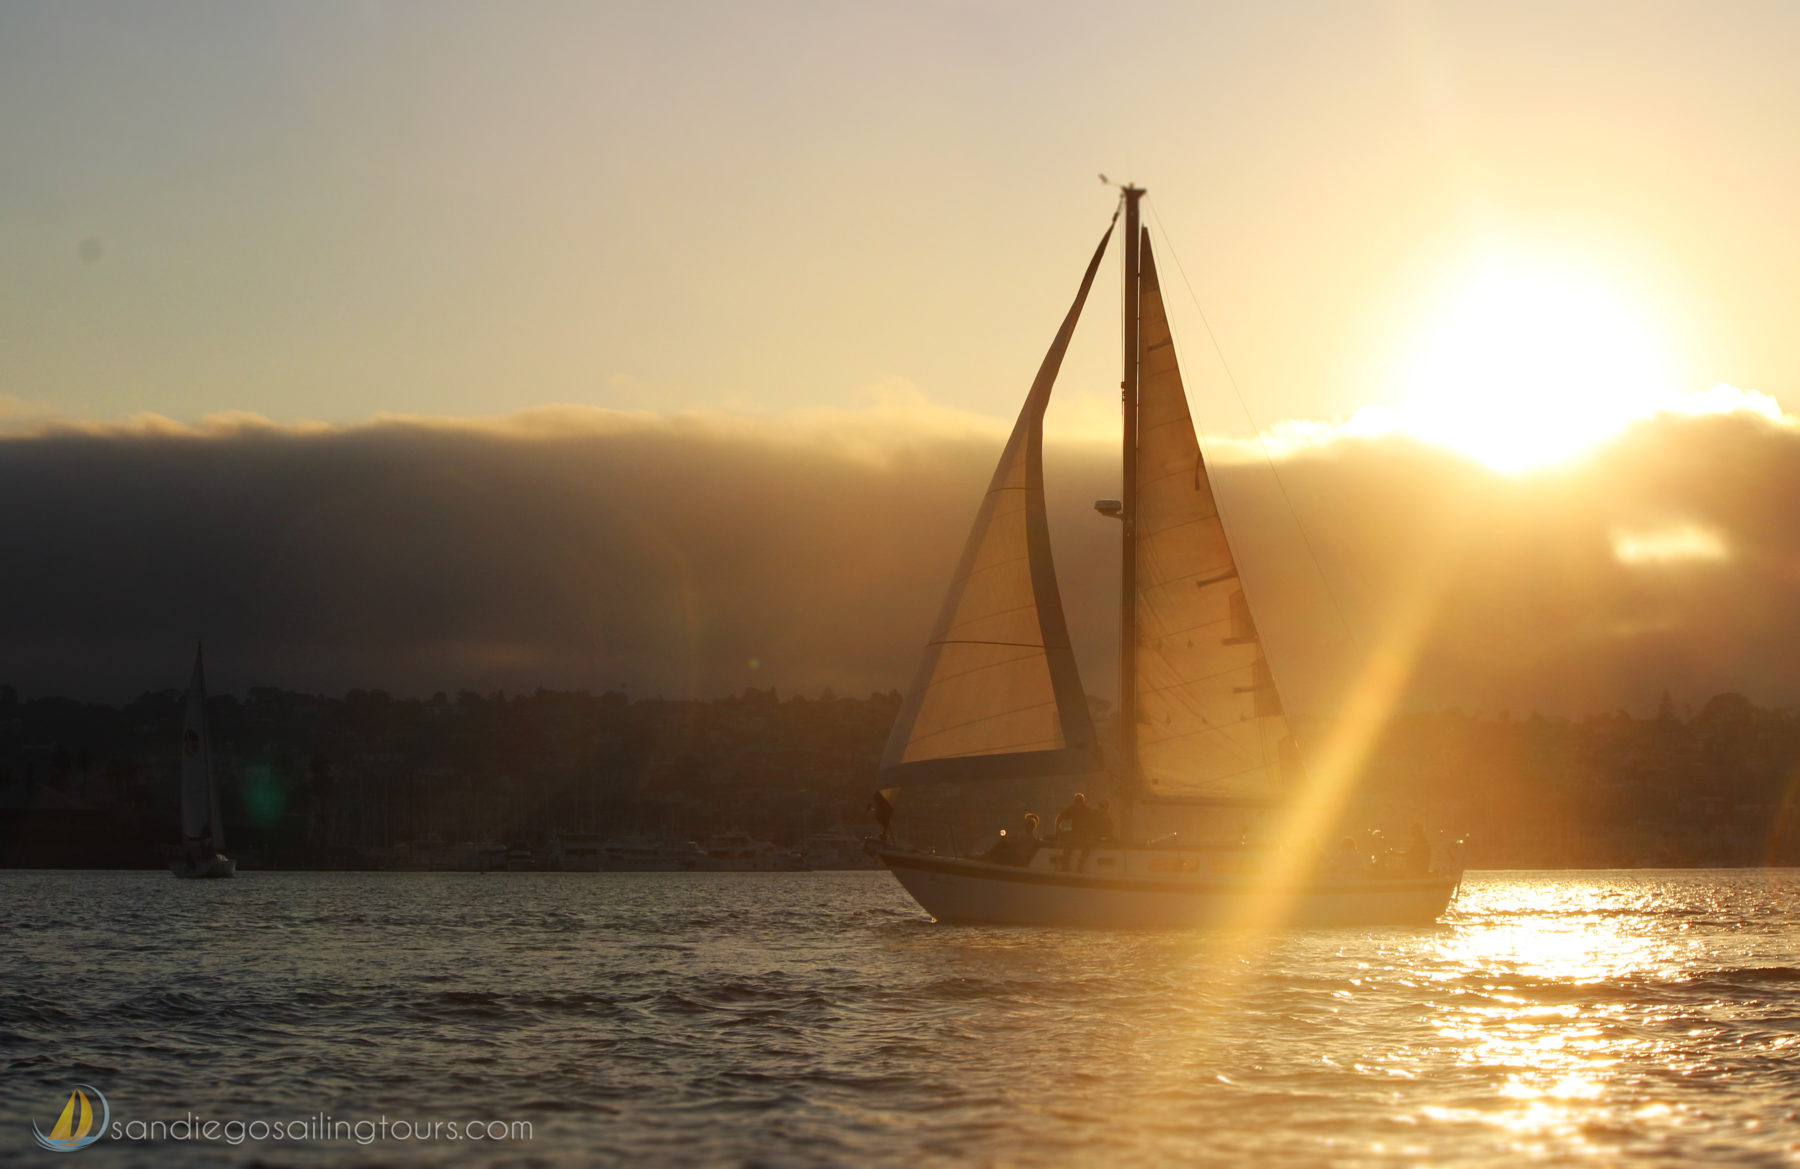 Featured Image: The San Diego Sunset